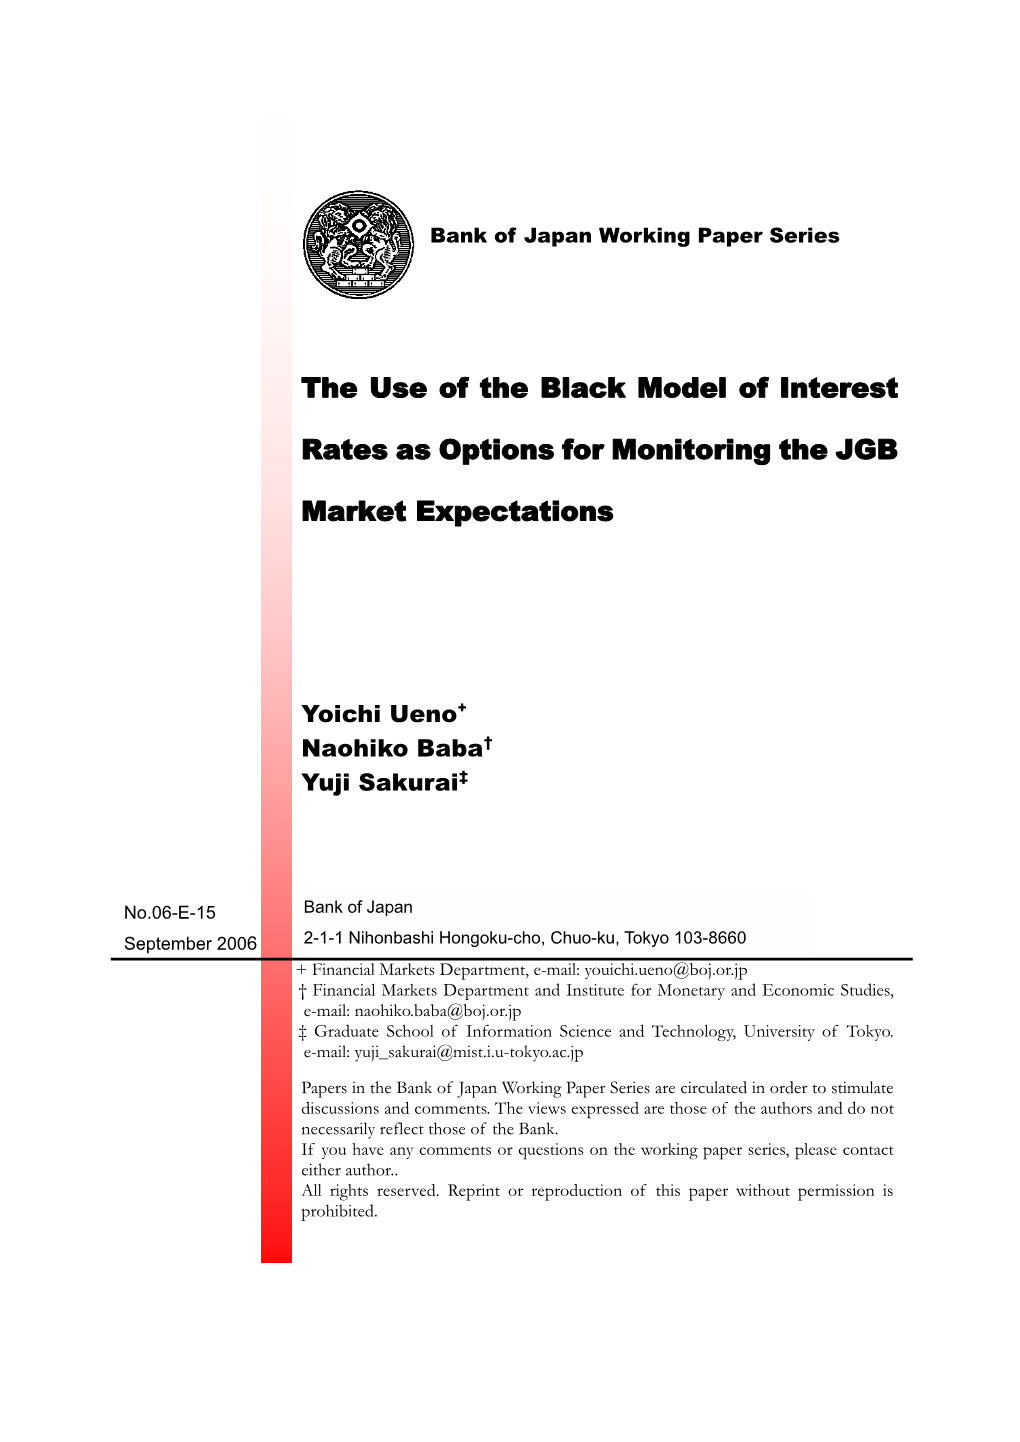 The Use of the Black Model of Interest Rates As Options for Monitoring the JGB Market Expectations